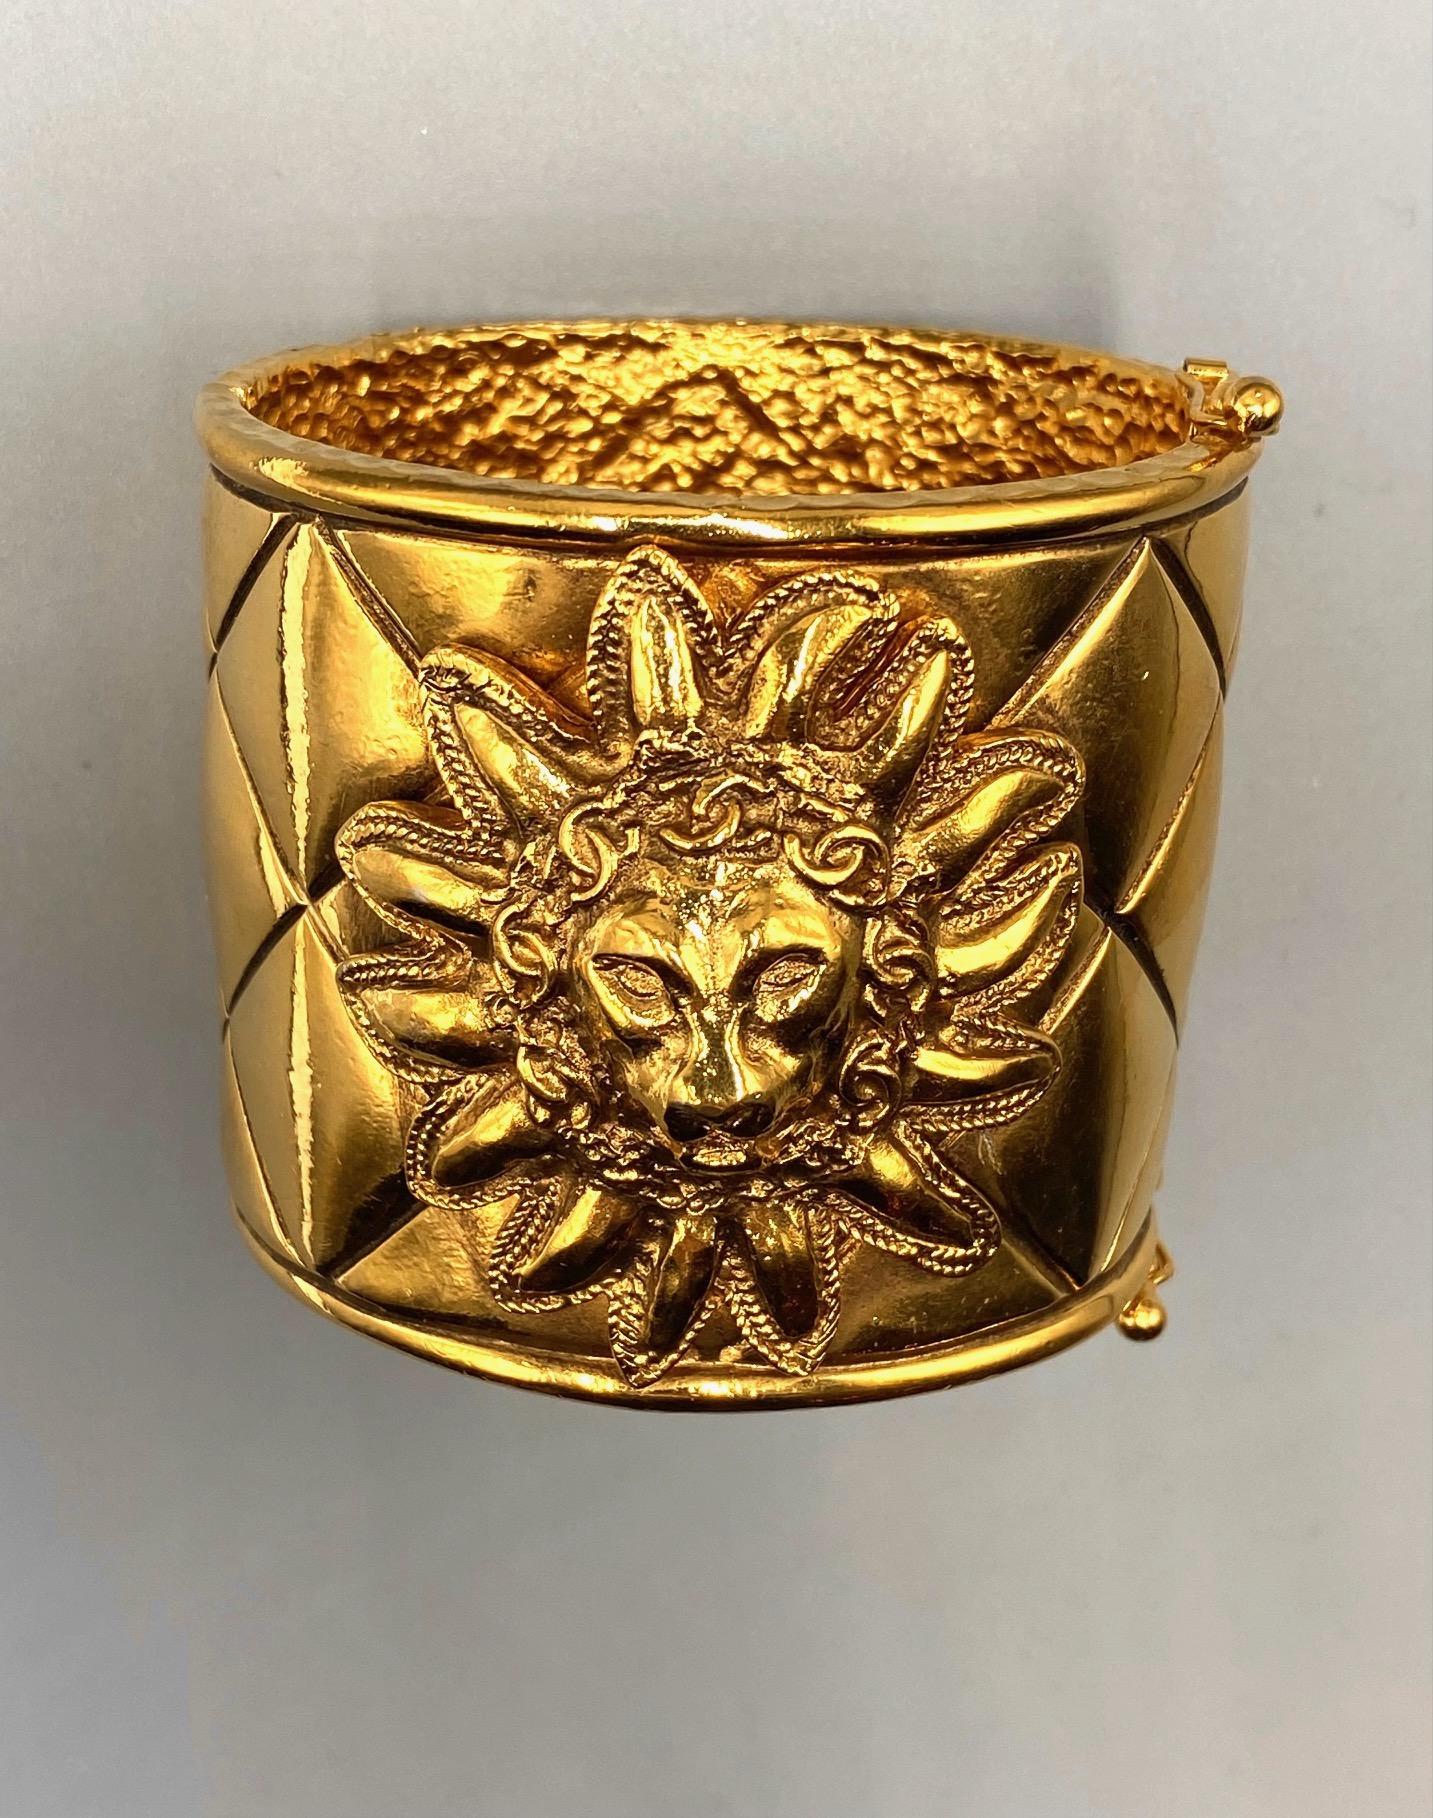 Presented is one of Chanel's iconic gold quilt design cuff bracelets with lion face by famous French designer Robert Goosens of Paris. Goosens first met Coco Chanel in 1953 and continued with a life long career of designing bijoux for her. One of